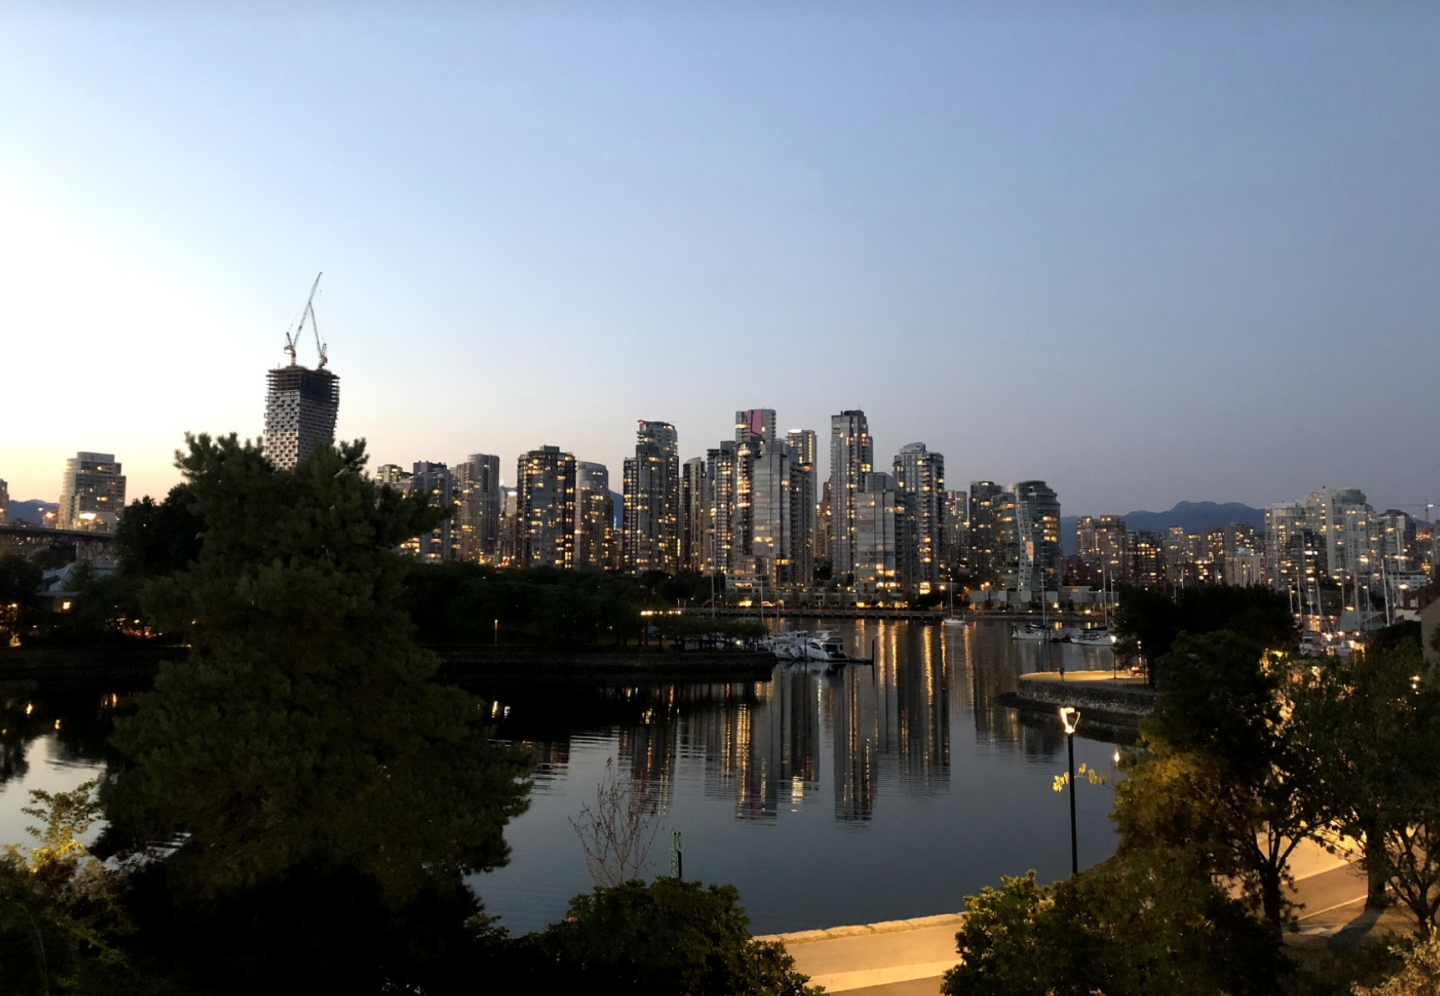 Living in Vancouver: a view of the city